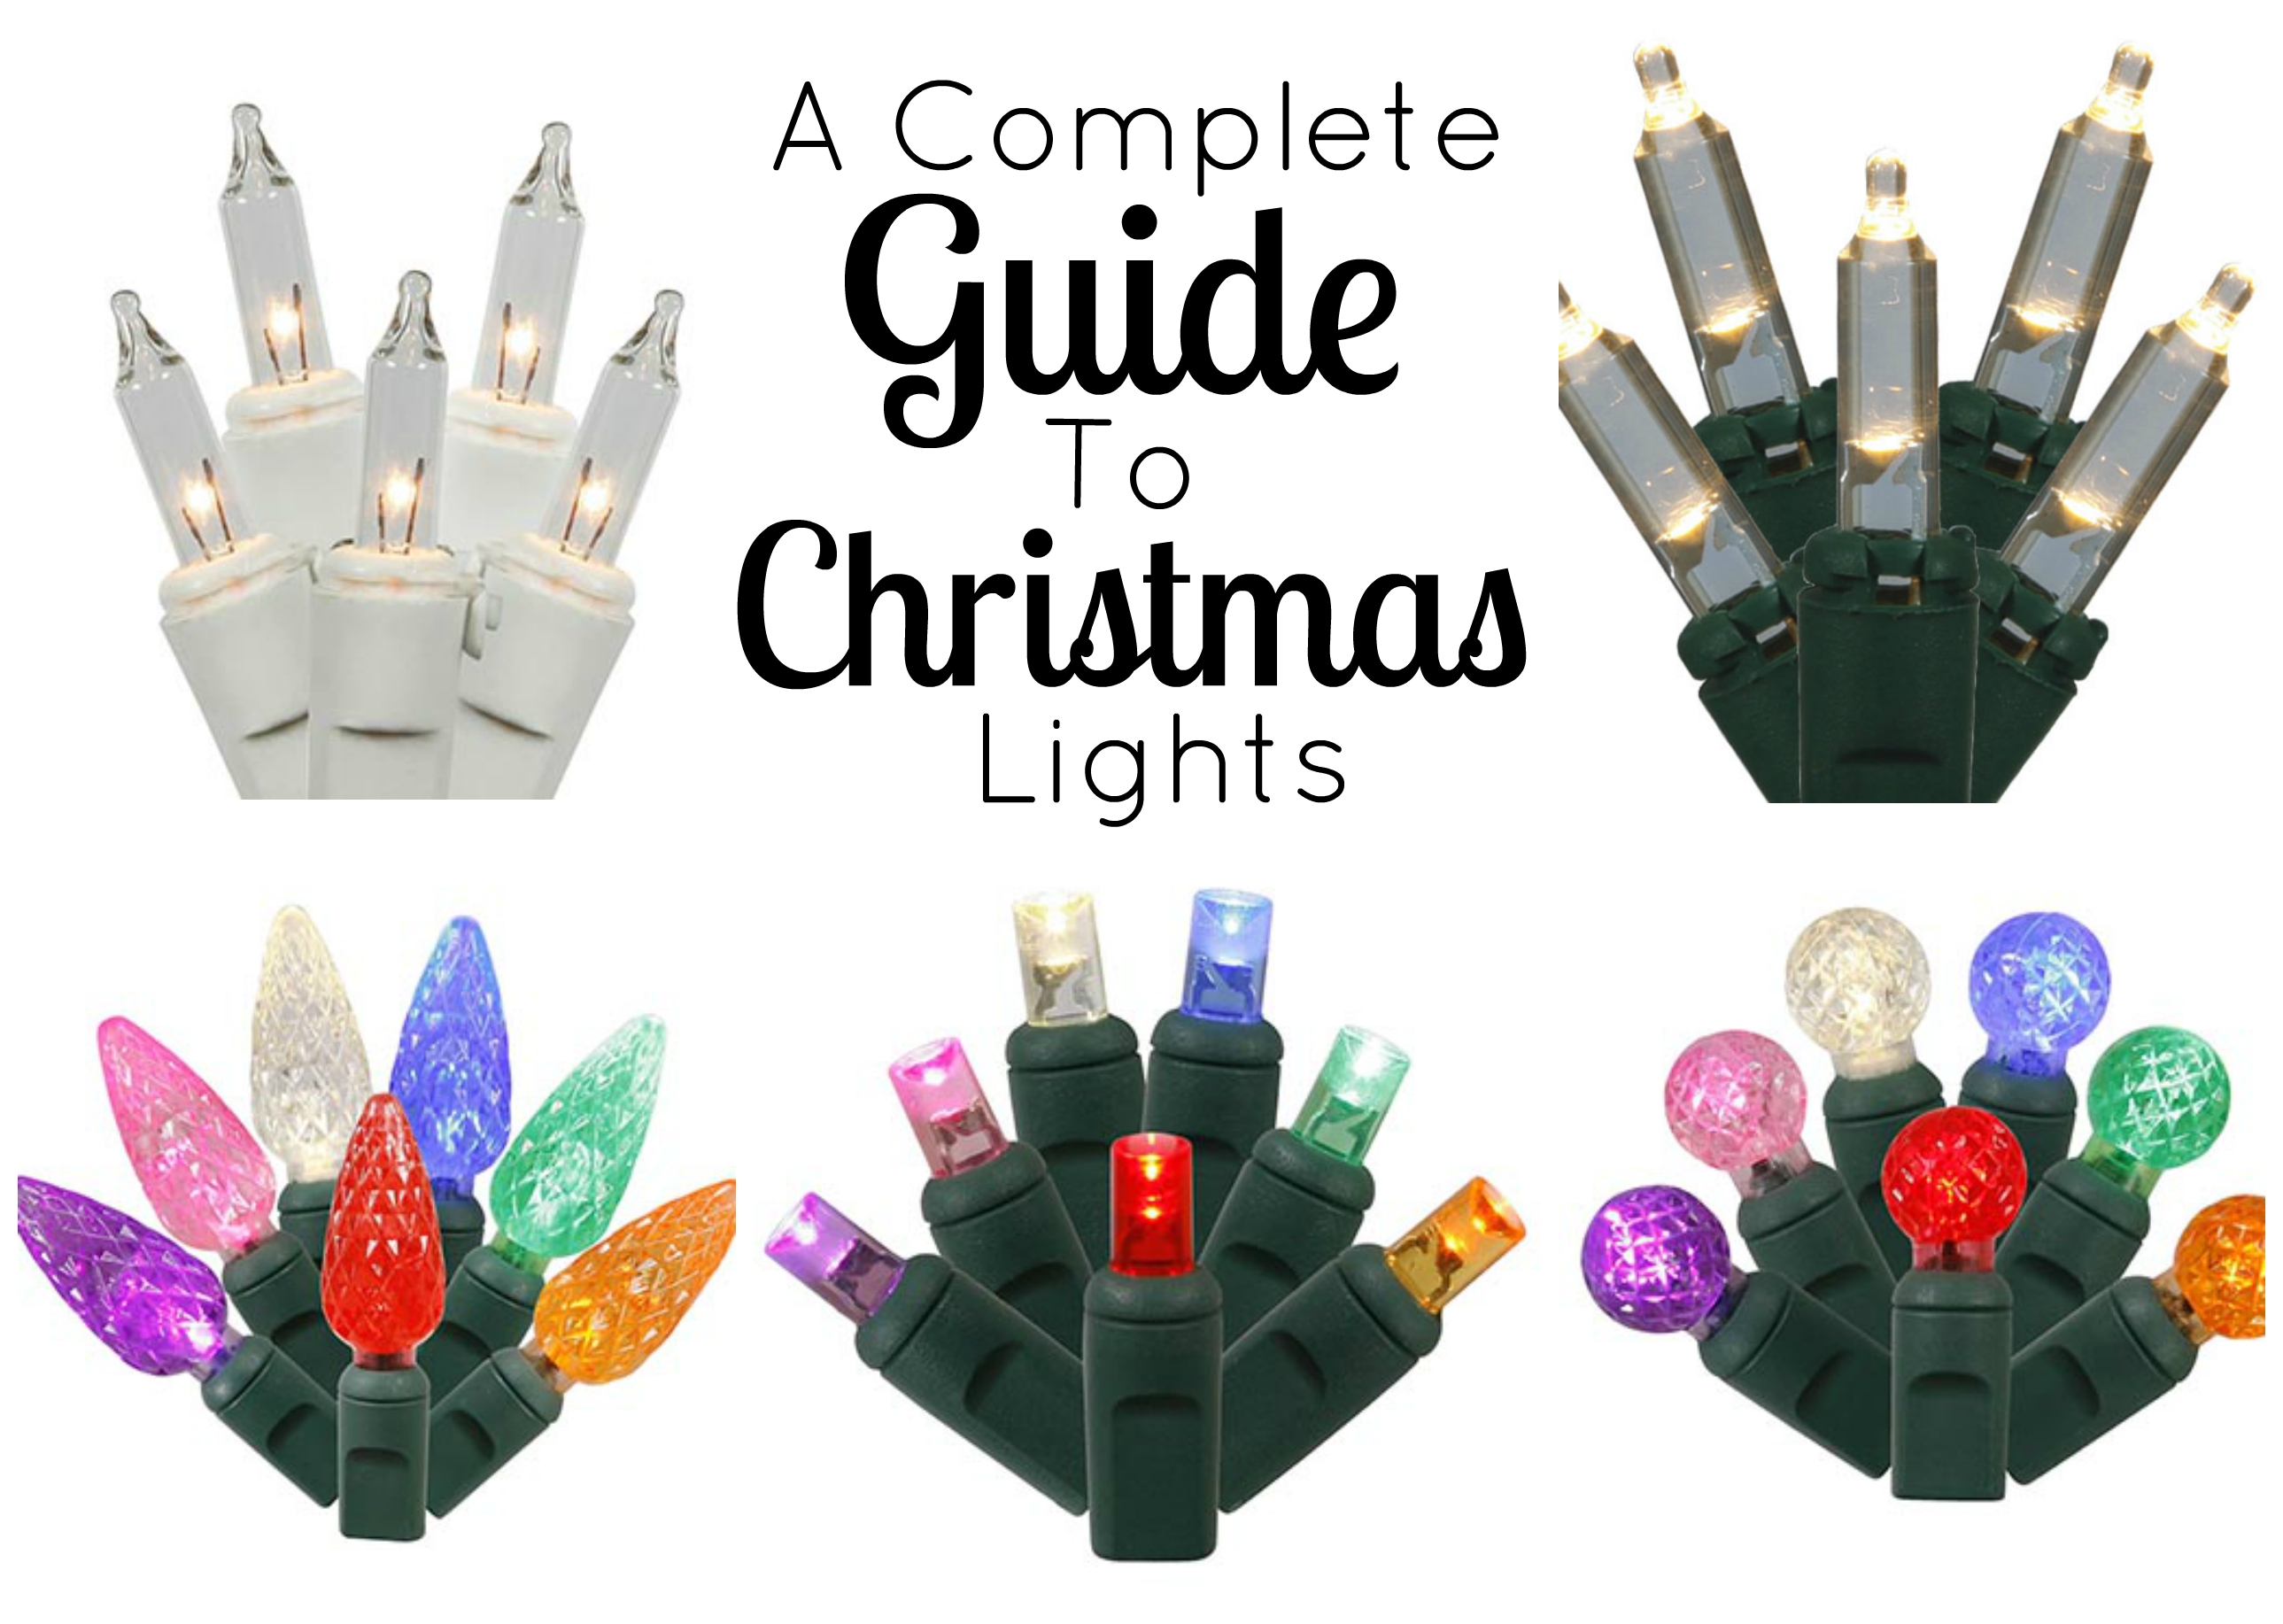 Mini lights are one of the most popular varieties of Christmas lights